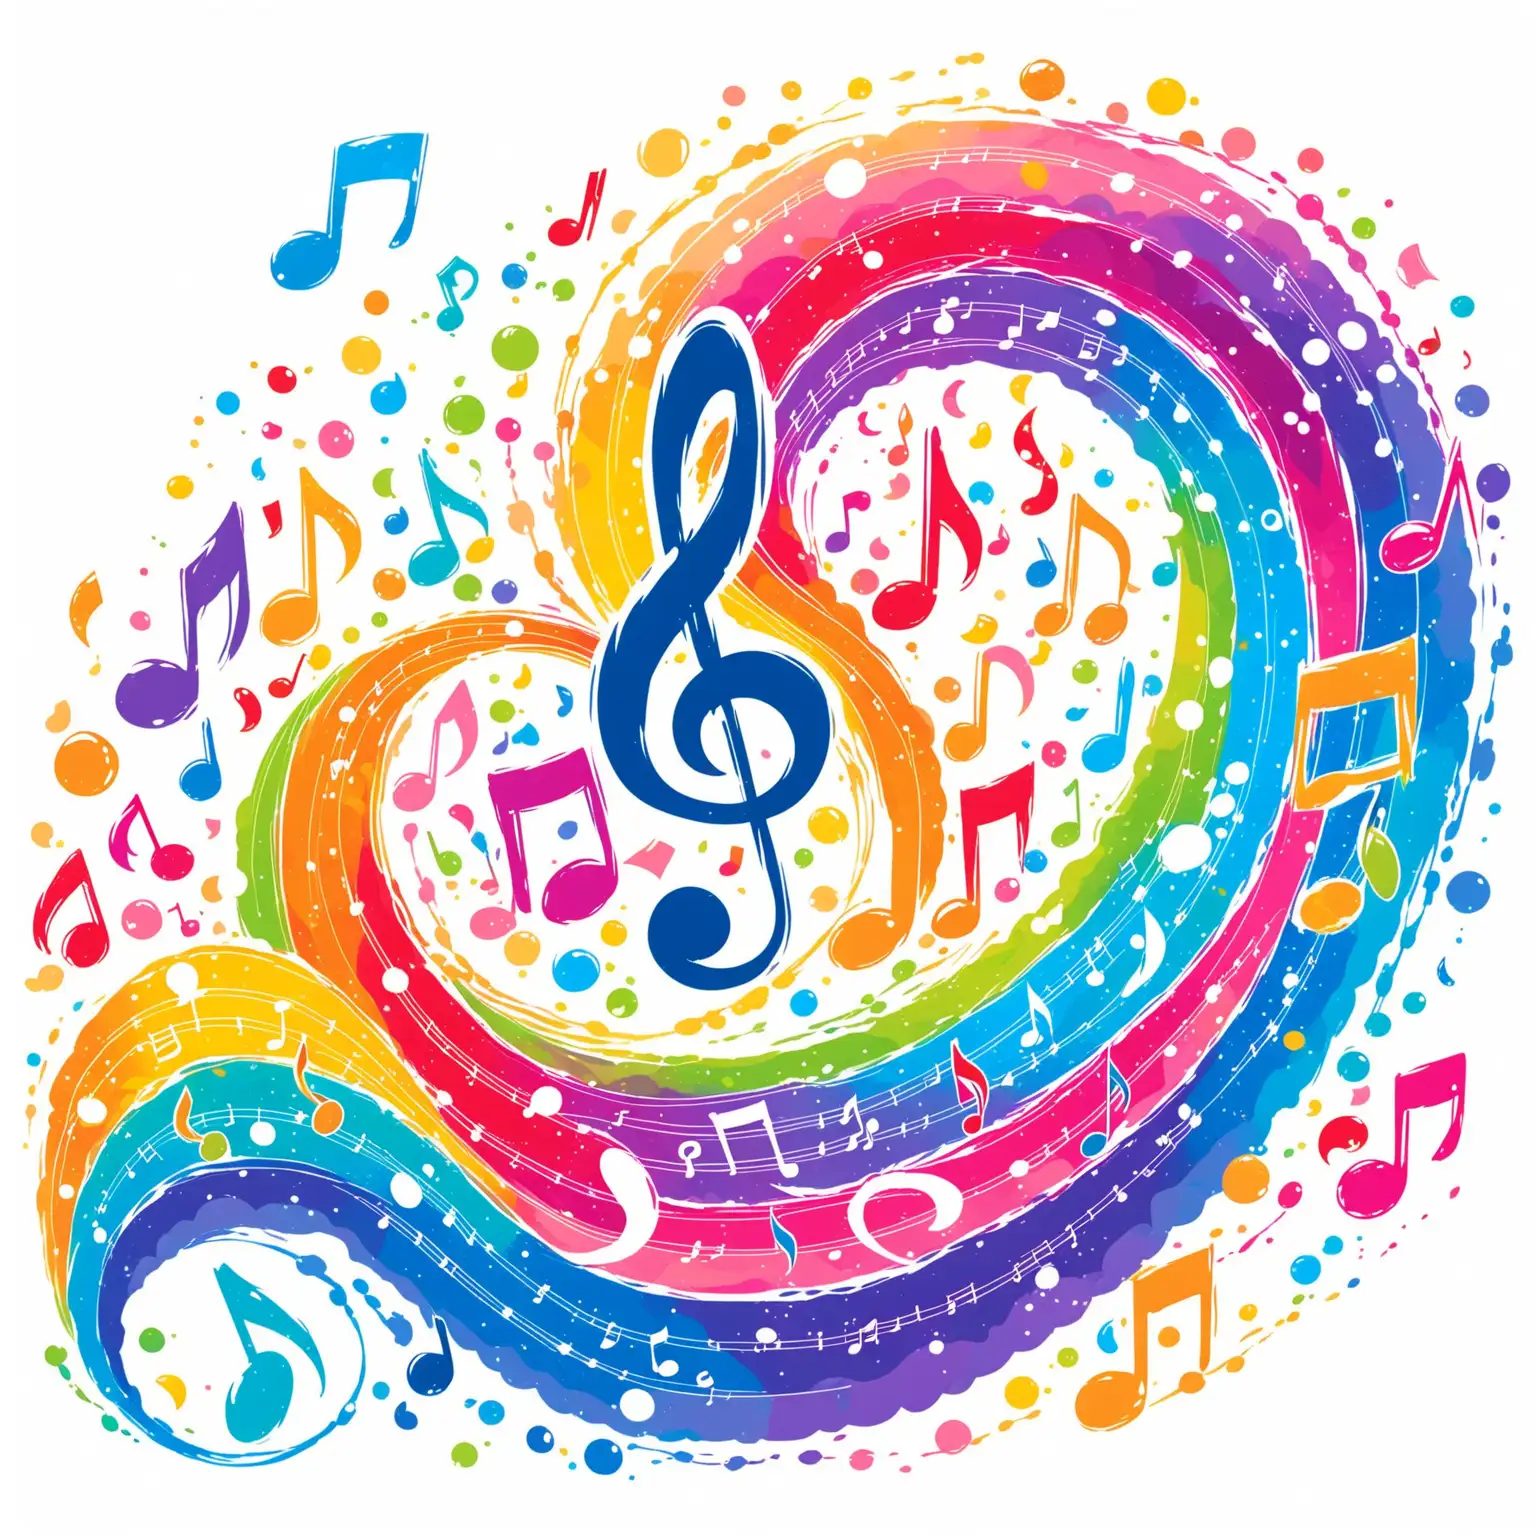 Cartoon multy-coloured music stave in a wavy fancy manner with Bass clef and coloured notes on it. Background is white with coloured clouds and splashes